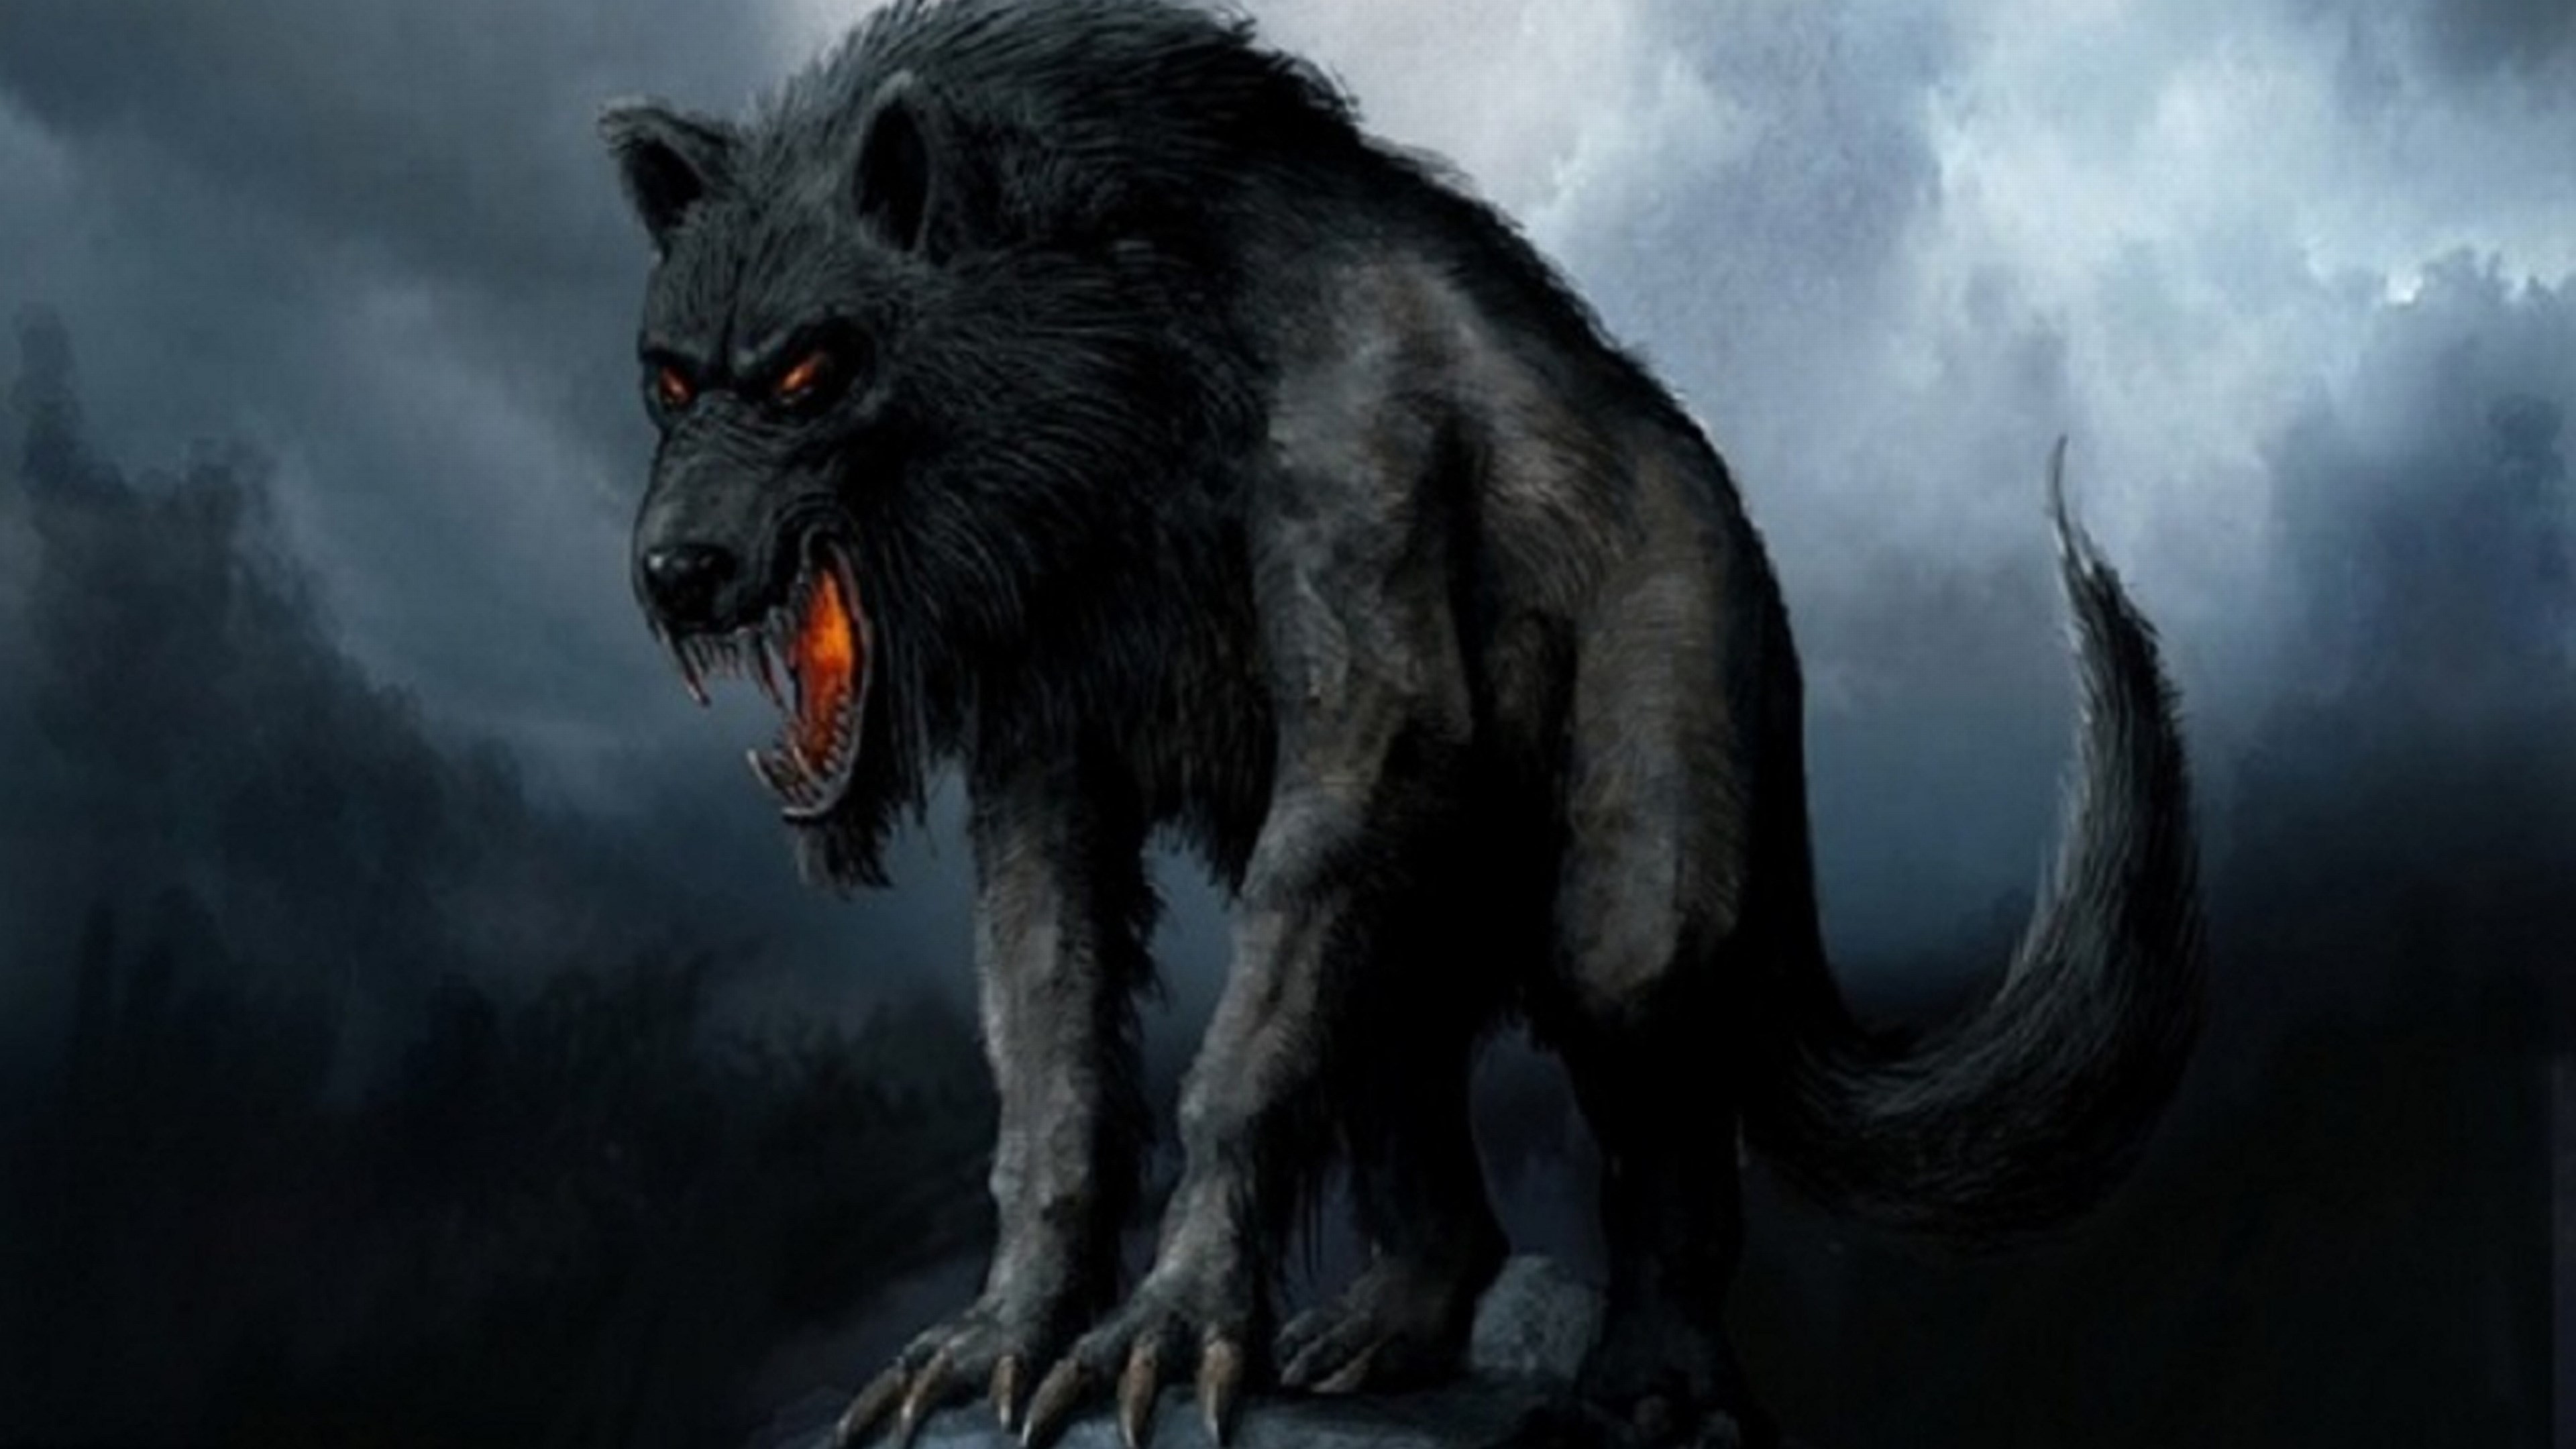 Werewolf Wallpaper For Android